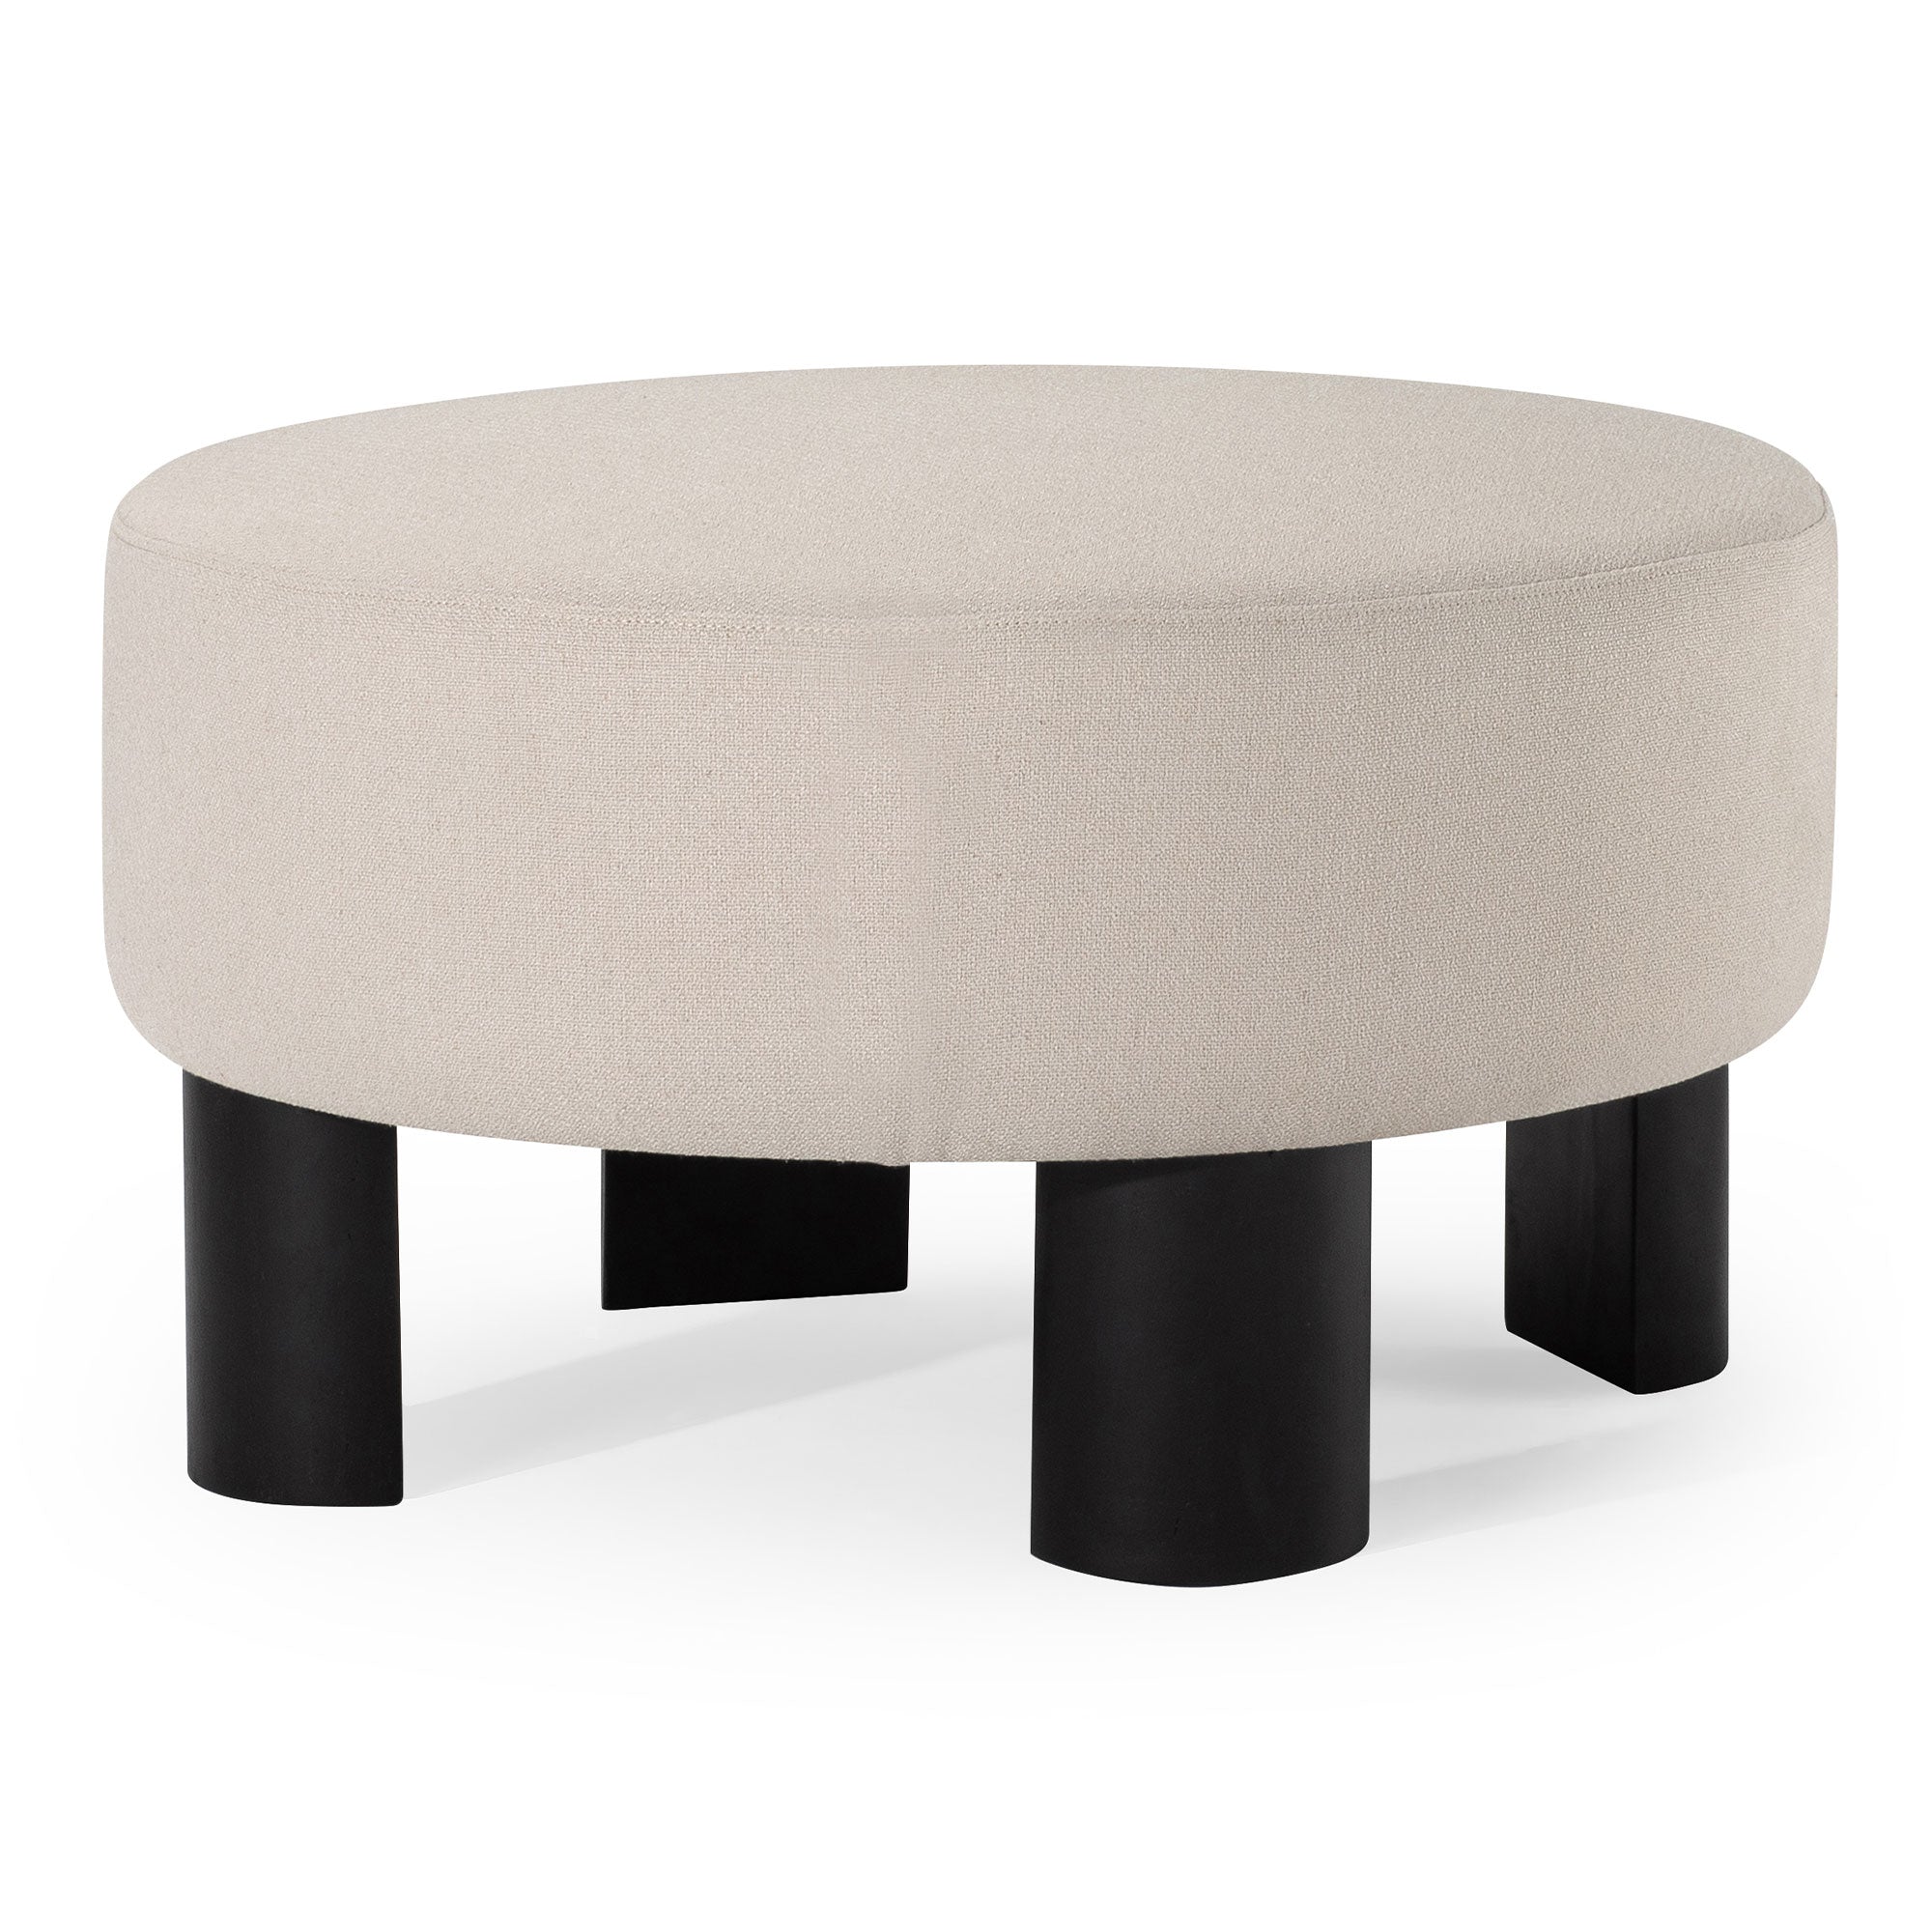 Celia Contemporary Upholstered Ottoman with Refined Black Wood Finish in Ottomans & Benches by Maven Lane